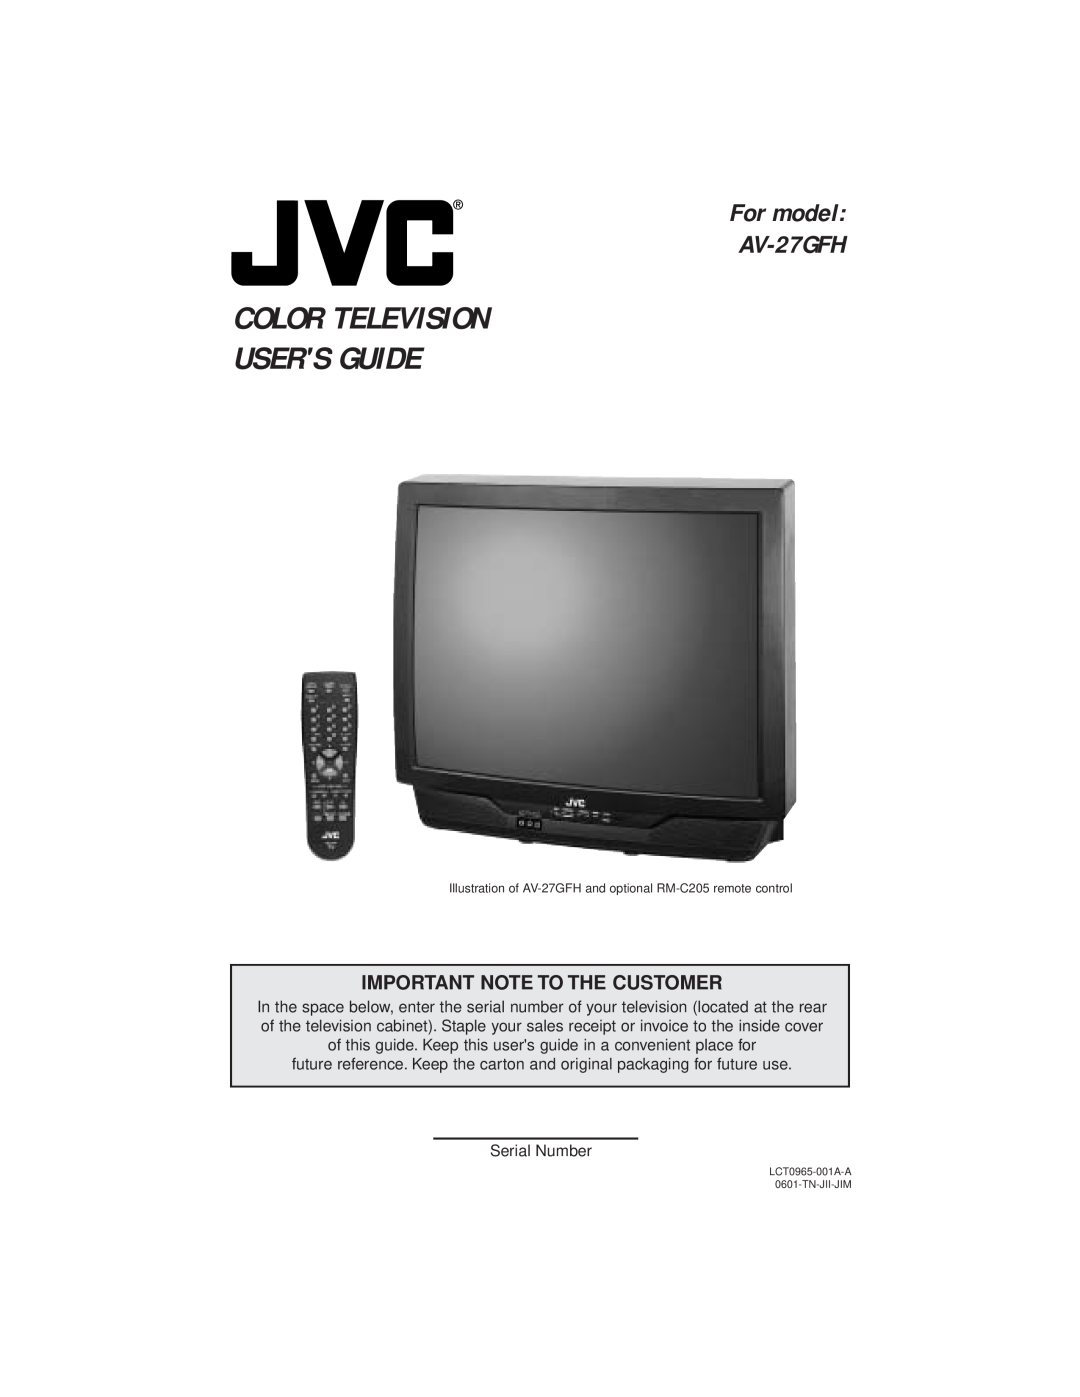 JVC manual Color Television Users Guide, For model AV-27GFH, Important Note To The Customer 